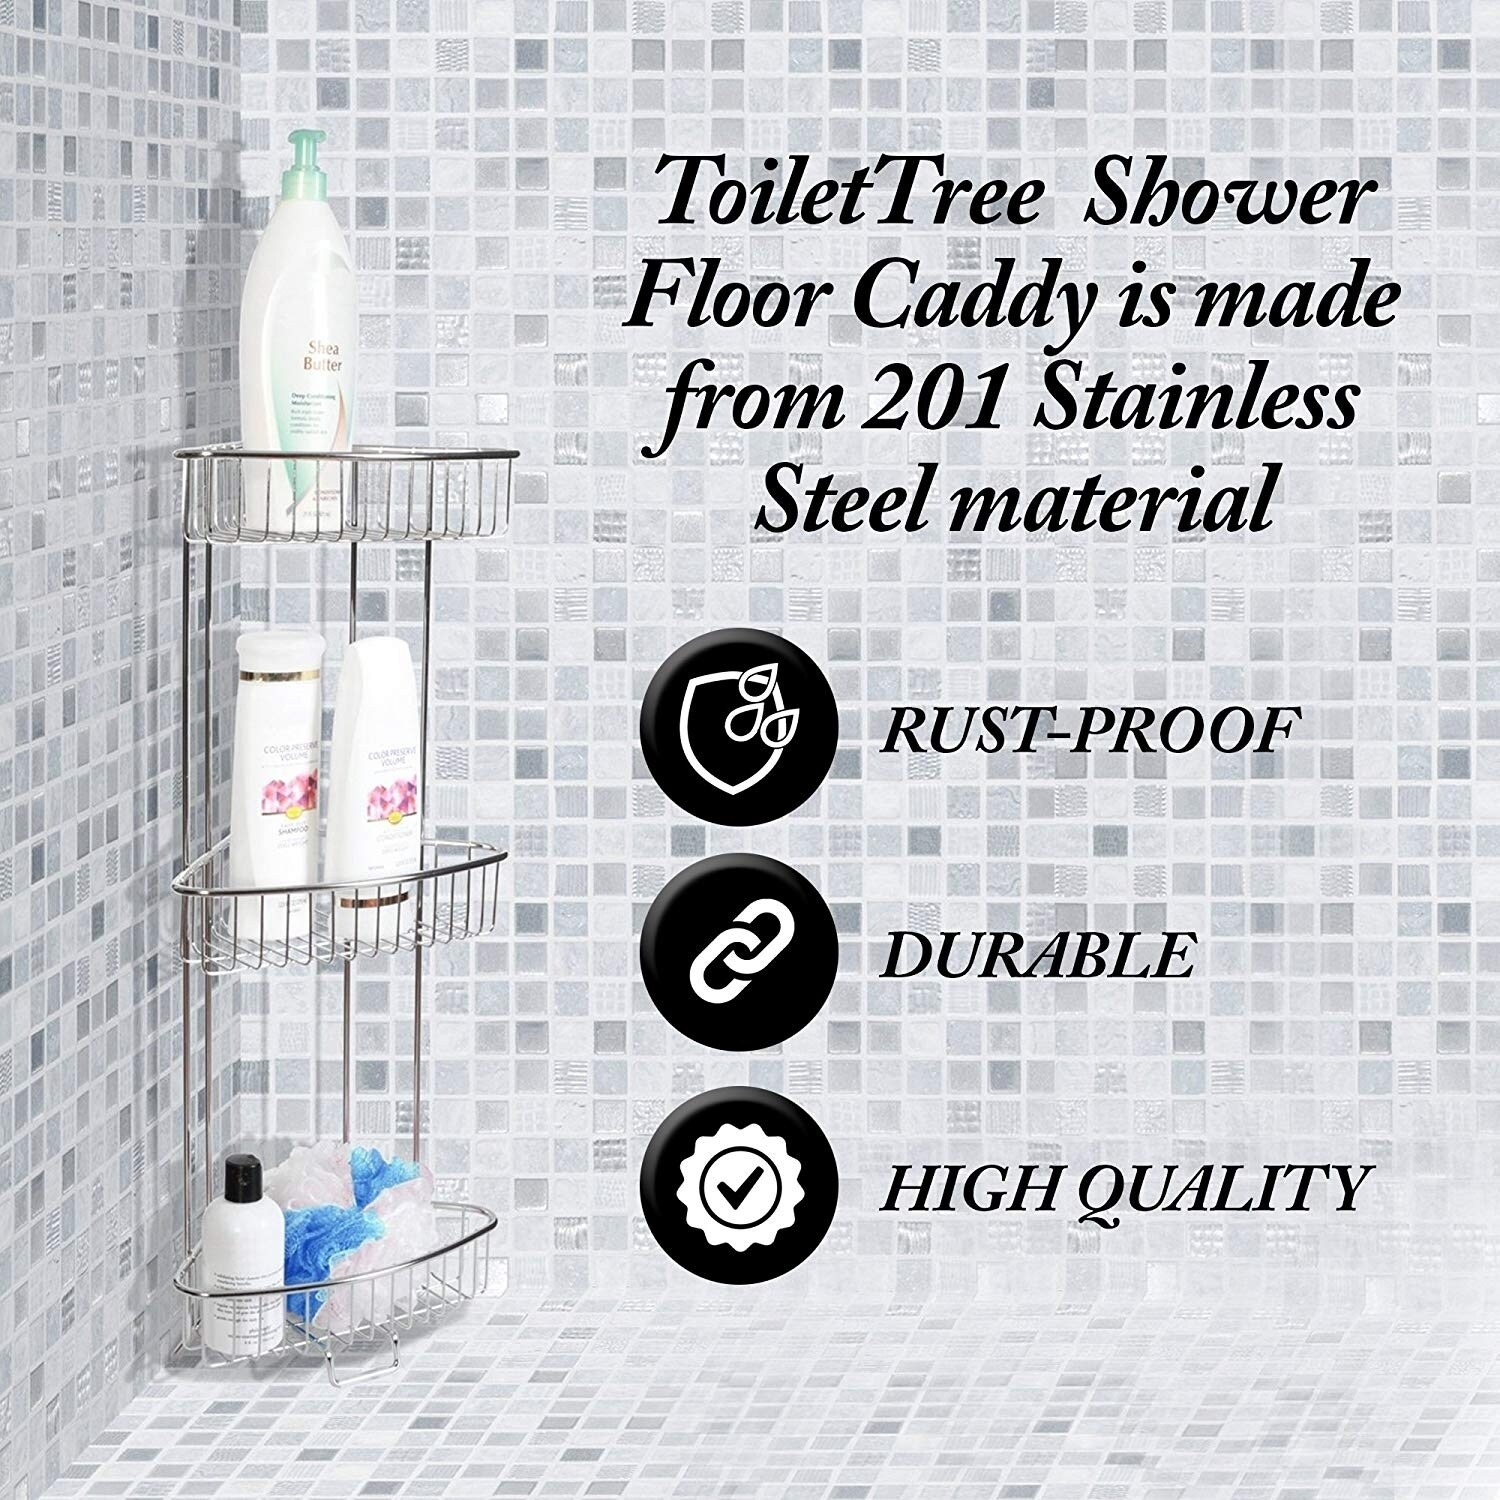 https://ak1.ostkcdn.com/images/products/30092019/ToiletTree-Products-Rust-Proof-Stainless-Steel-Shower-Floor-Caddy-3-Tiers-f9fb8e8c-625d-46e8-af94-21b54e967d19.jpg